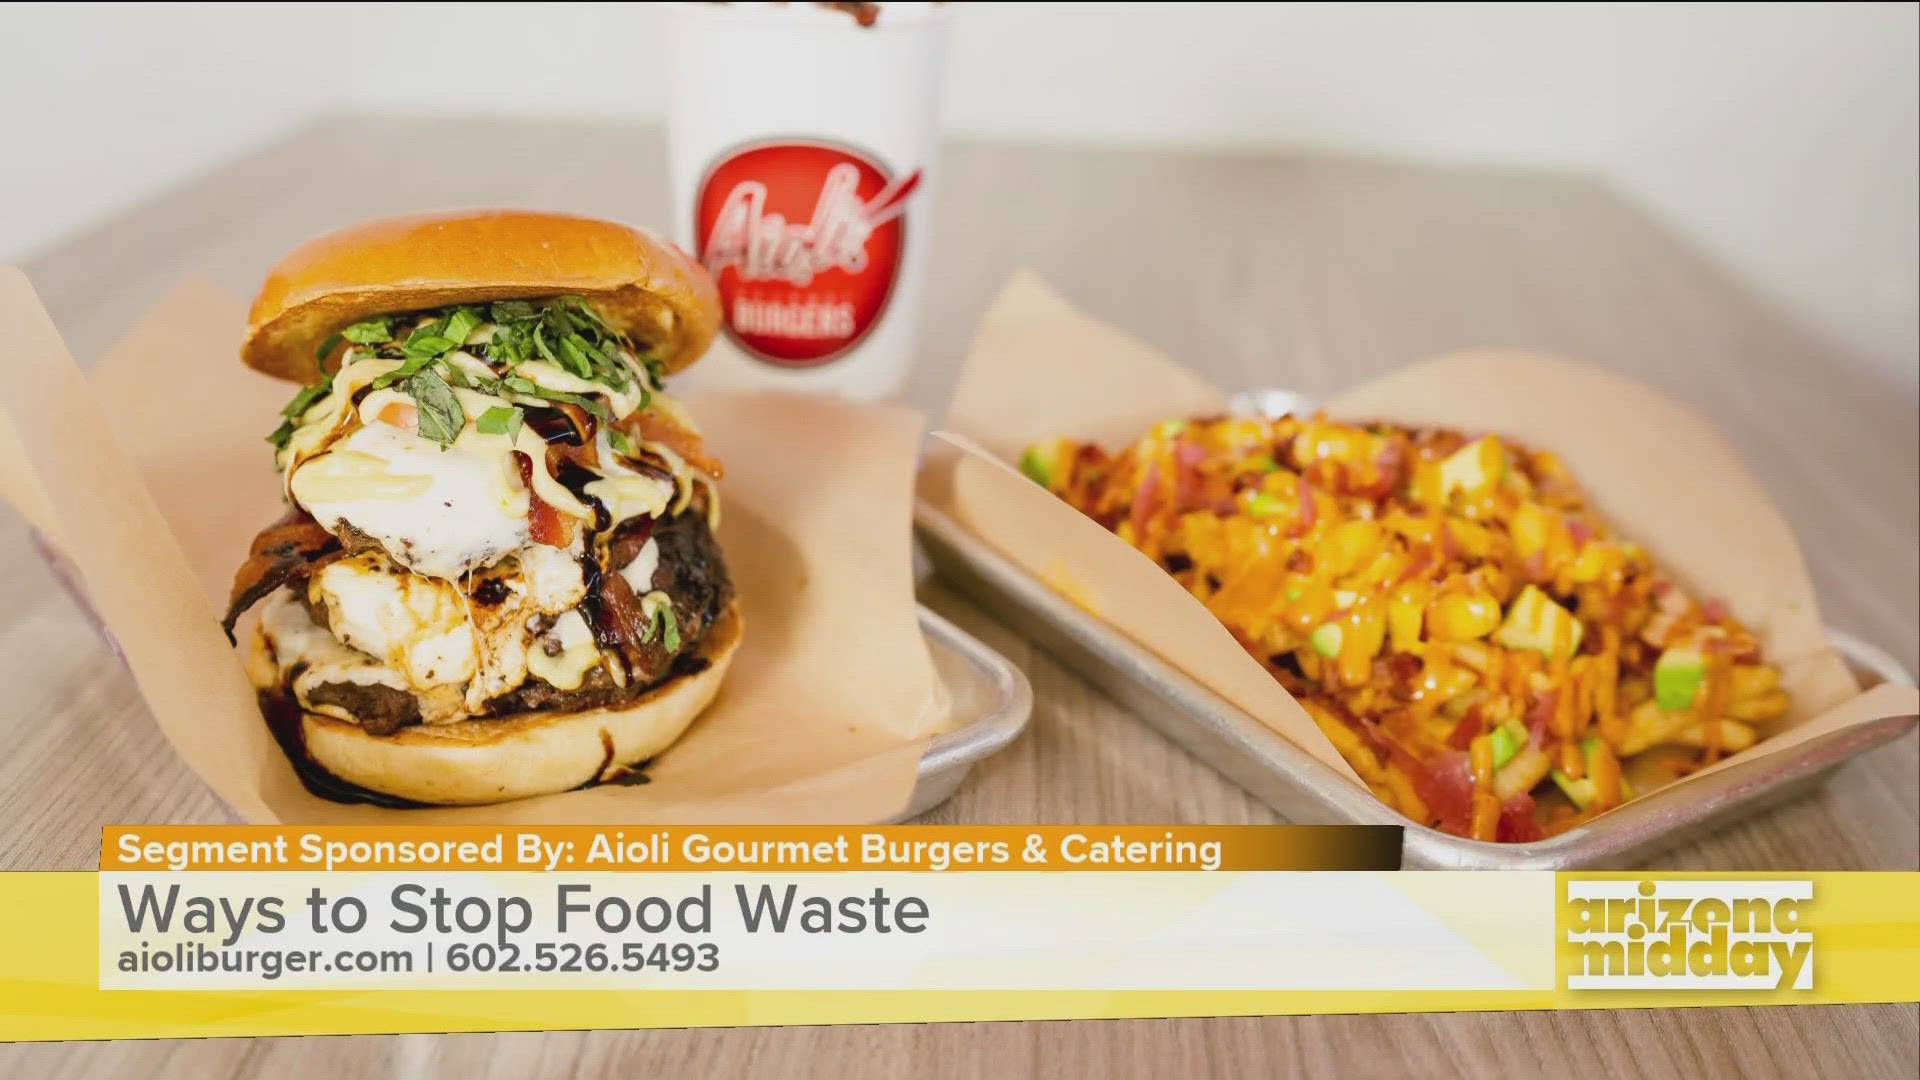 Fight food waste with Burger Aioli